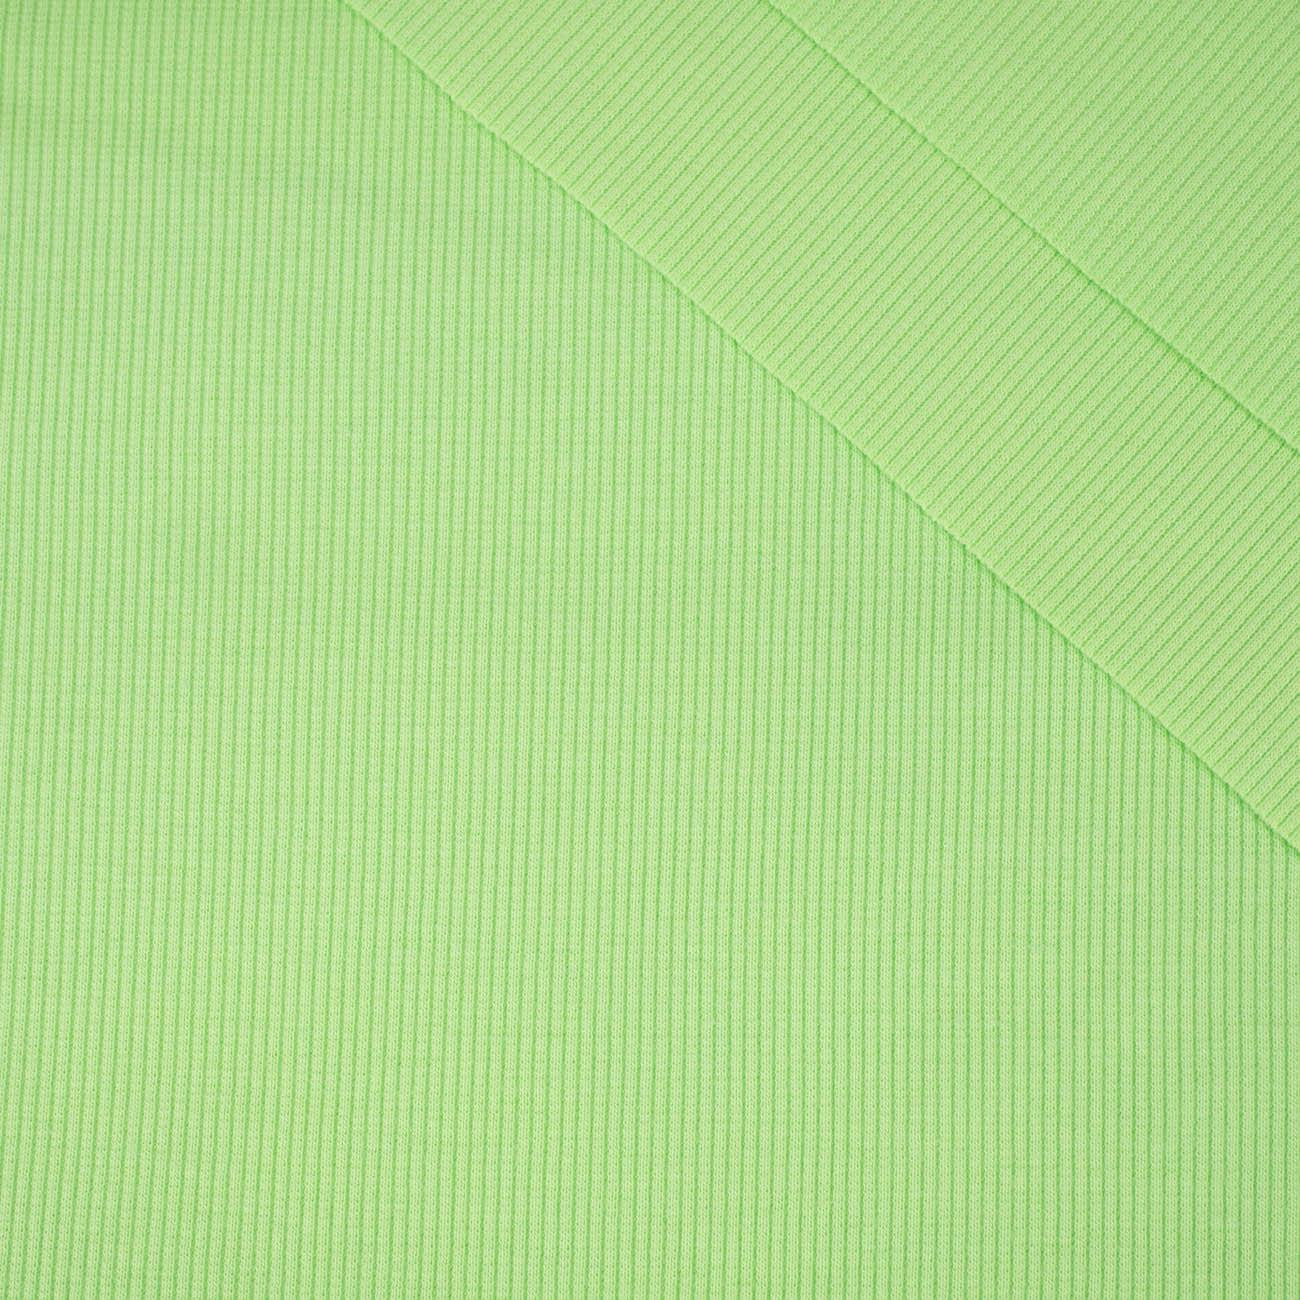 D-122 LIGHT GREEN - Ribbed knit fabric